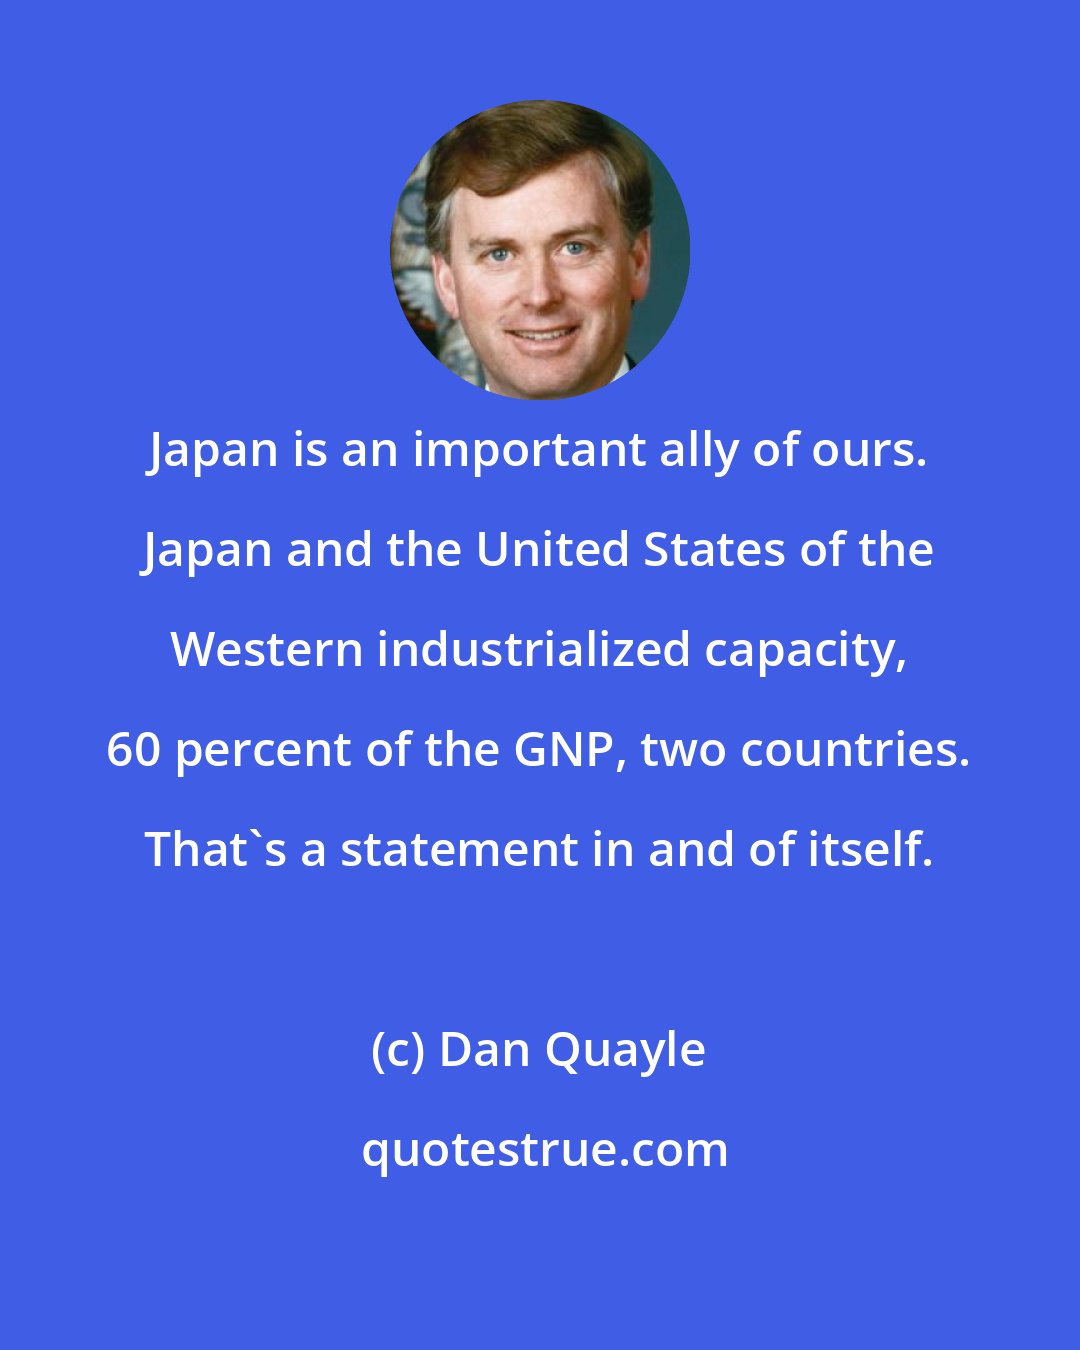 Dan Quayle: Japan is an important ally of ours. Japan and the United States of the Western industrialized capacity, 60 percent of the GNP, two countries. That's a statement in and of itself.